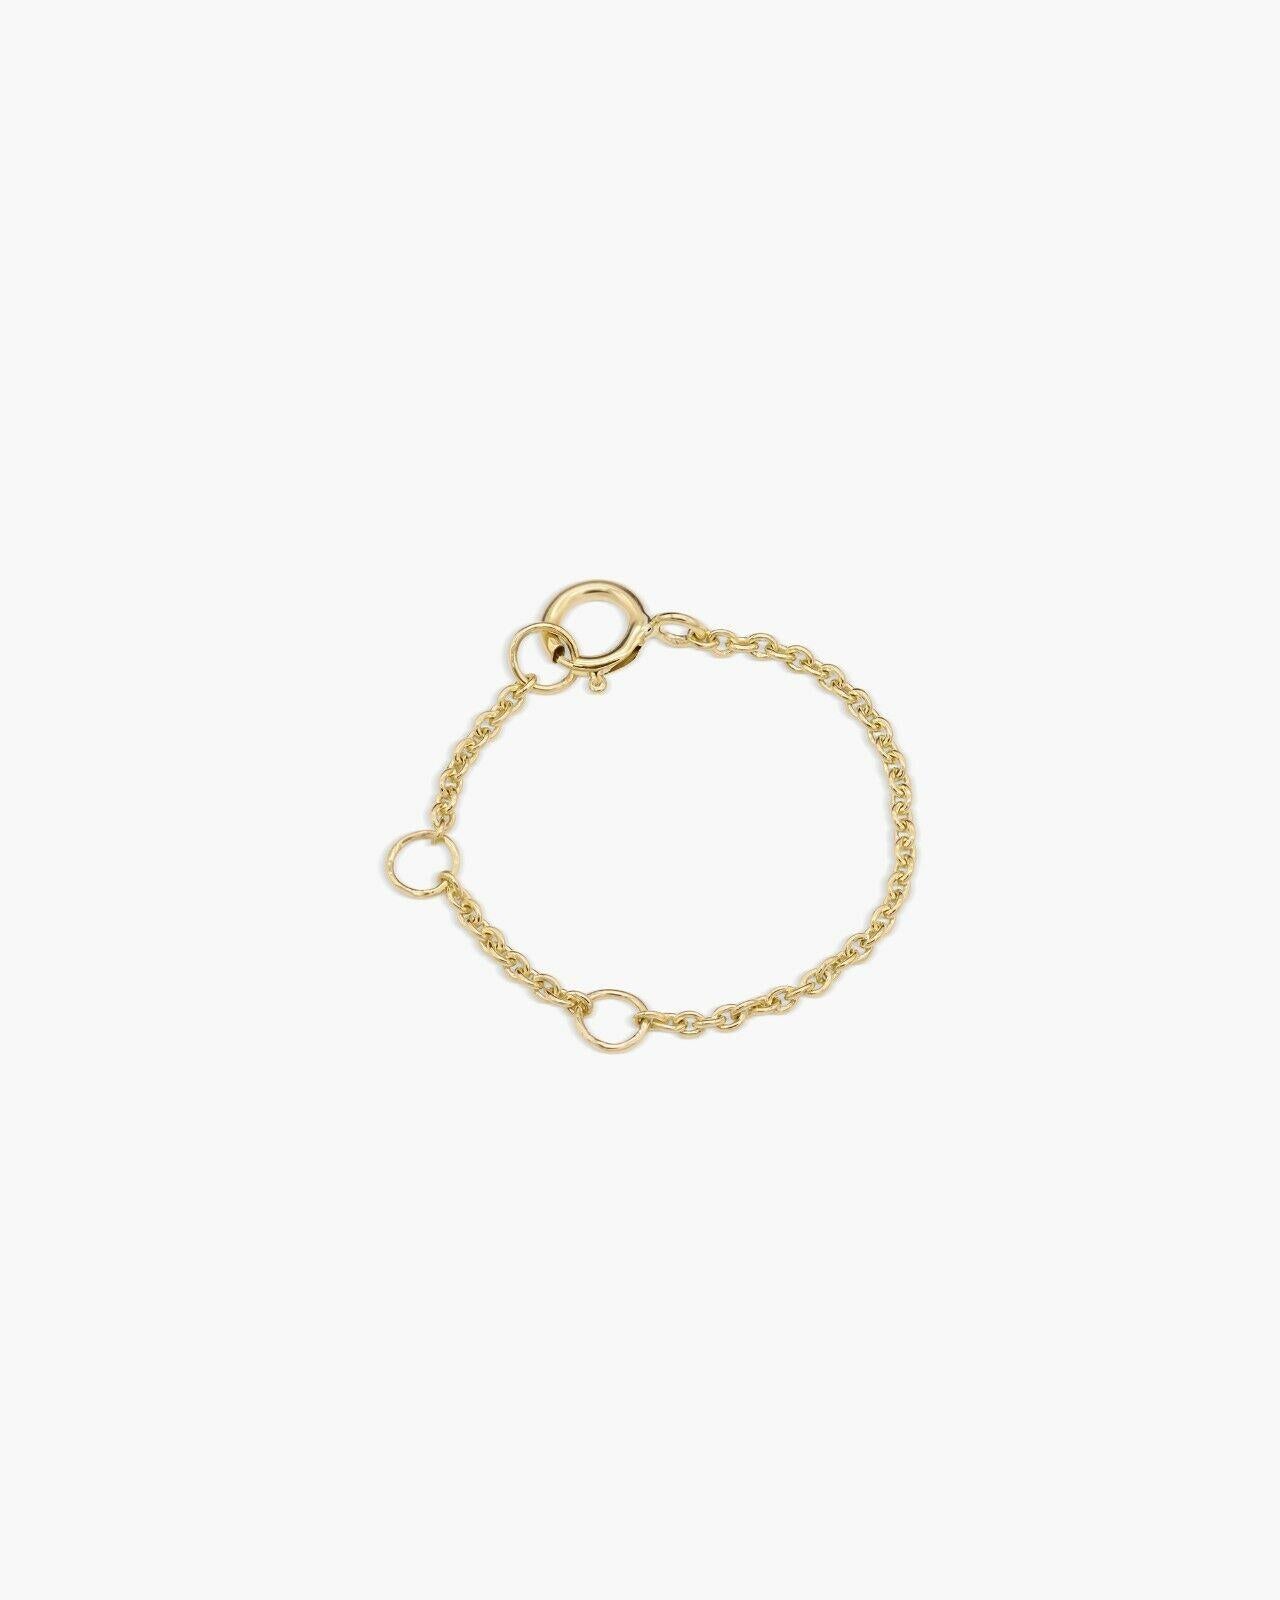 14k Solid Gold Watch Chain Accessories Gift for Lovers

Thickness
1.4mm Approx
Type
Chain
Gross Weight
0.46 Grams Approx
Size
2.5